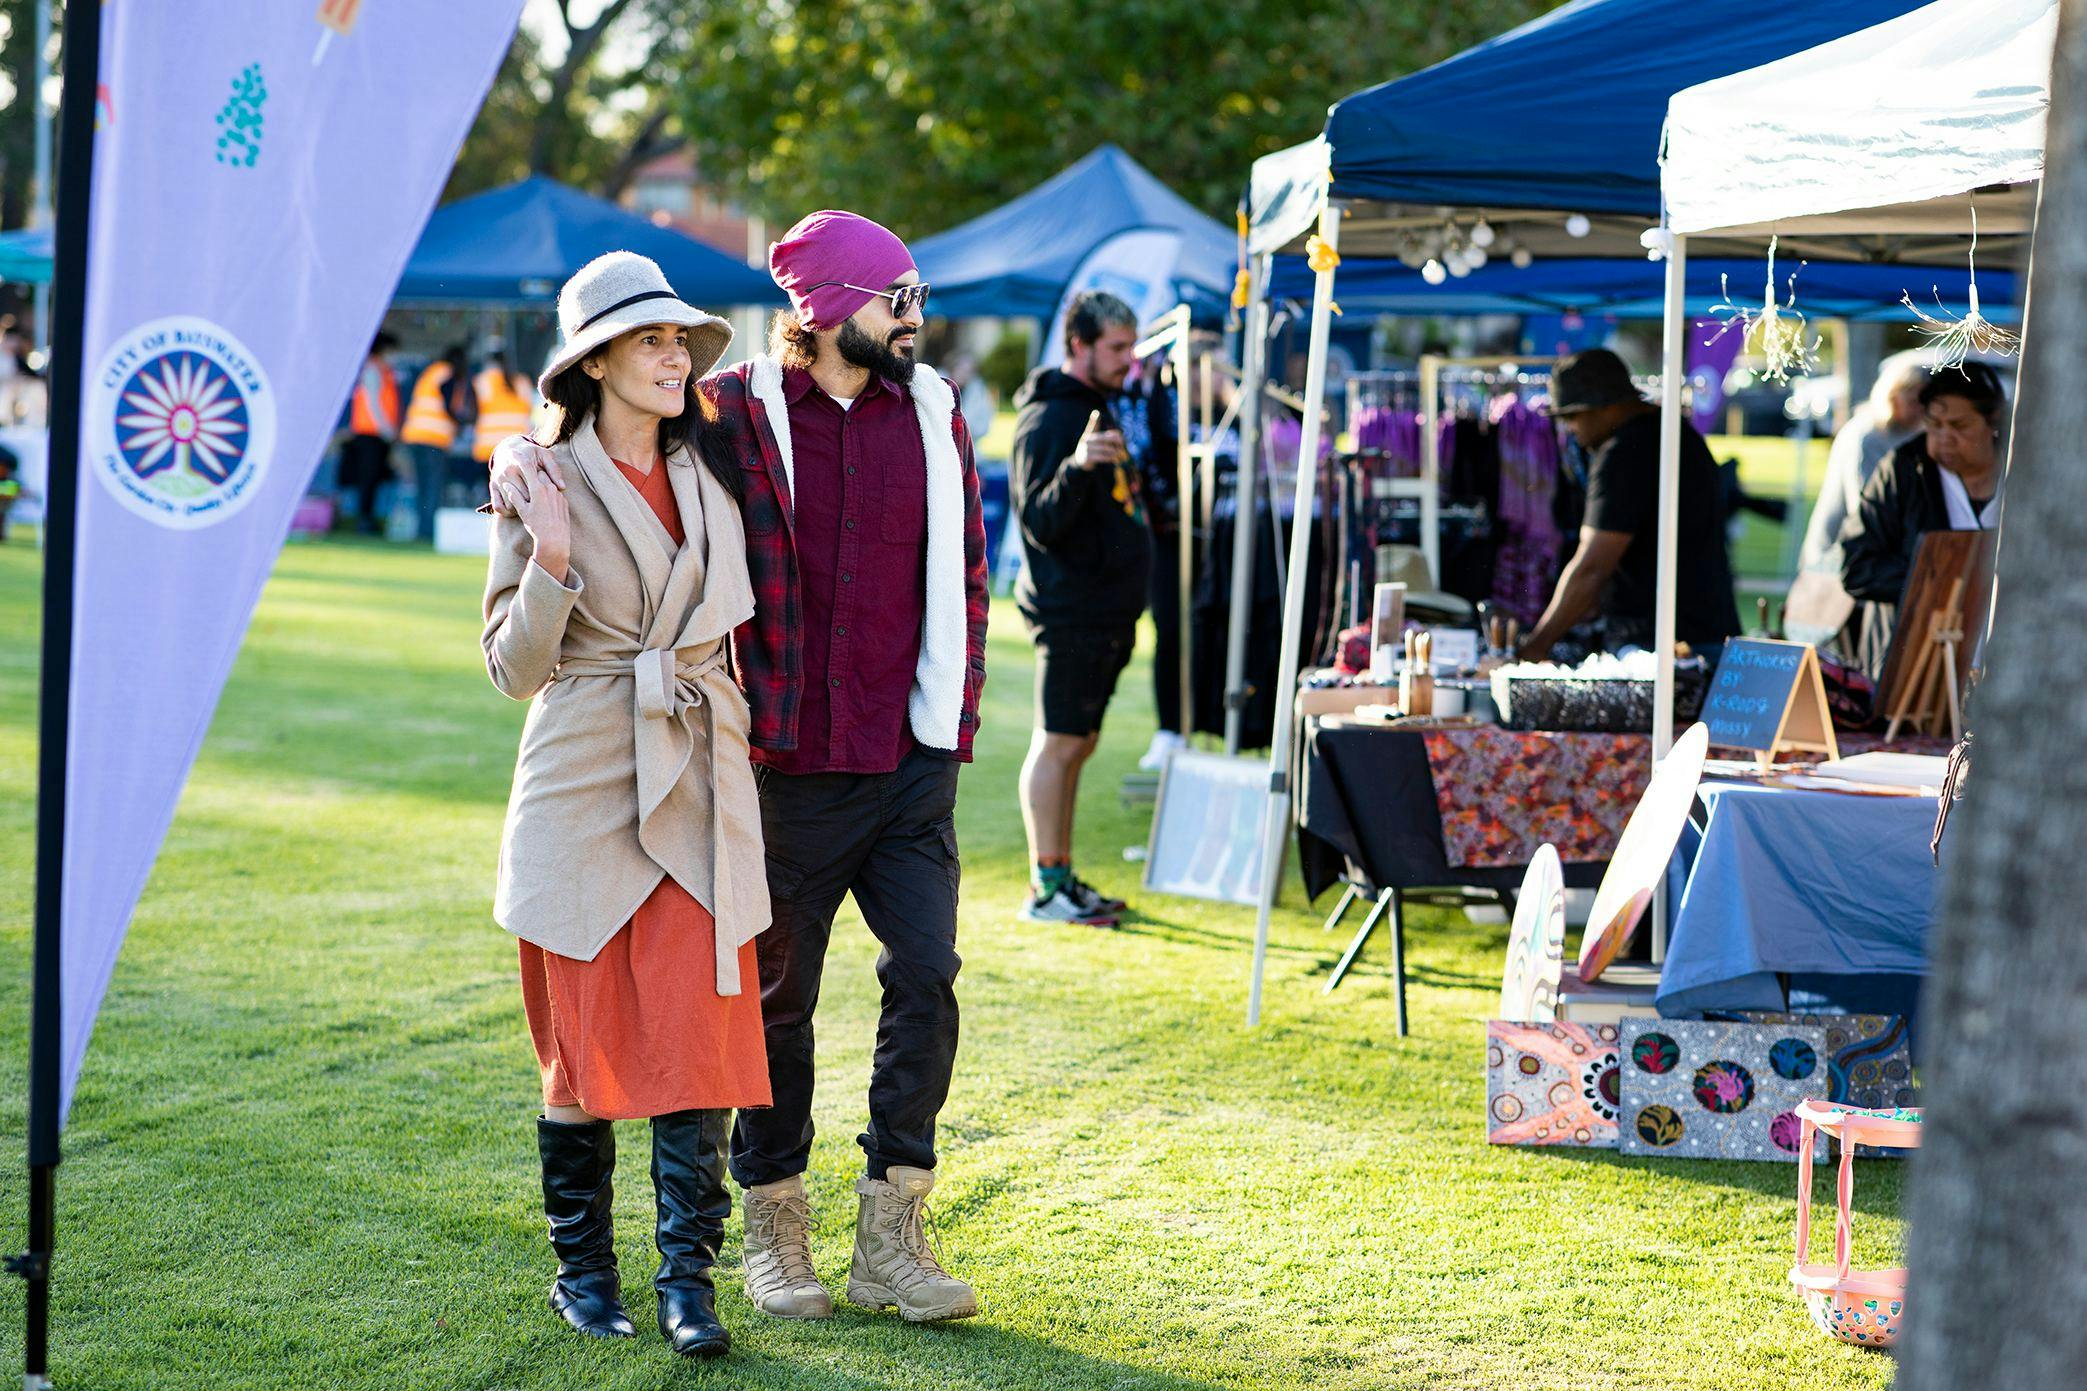 City of Bayswater RISE Up Art Market